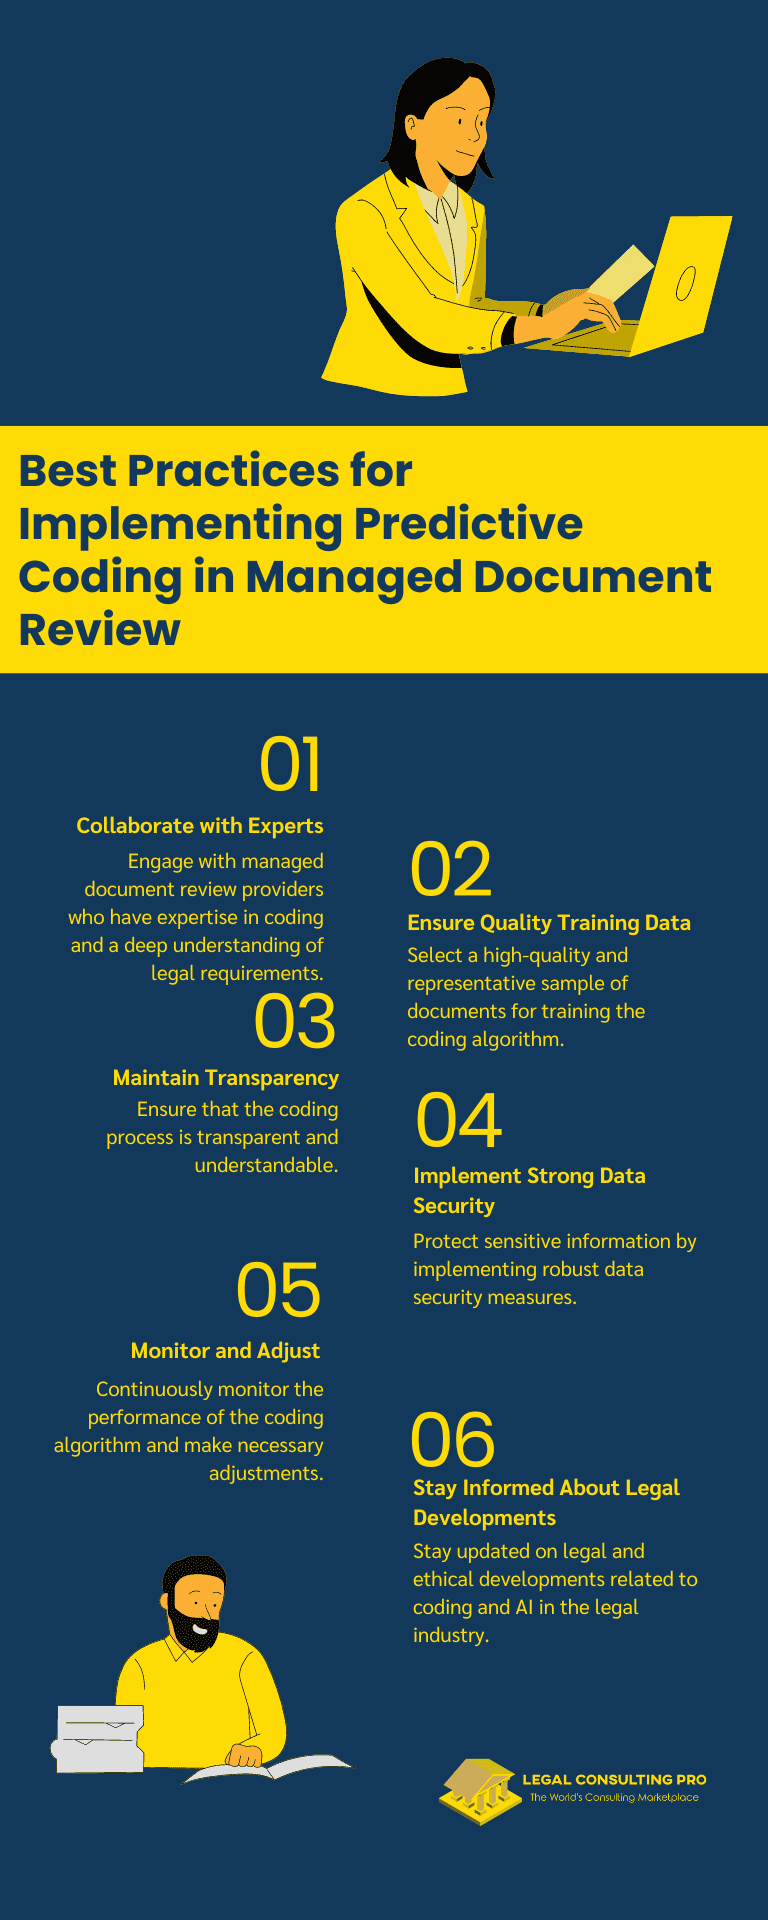 Best Practices for Implementing Predictive Coding in Managed Document Review Infographic